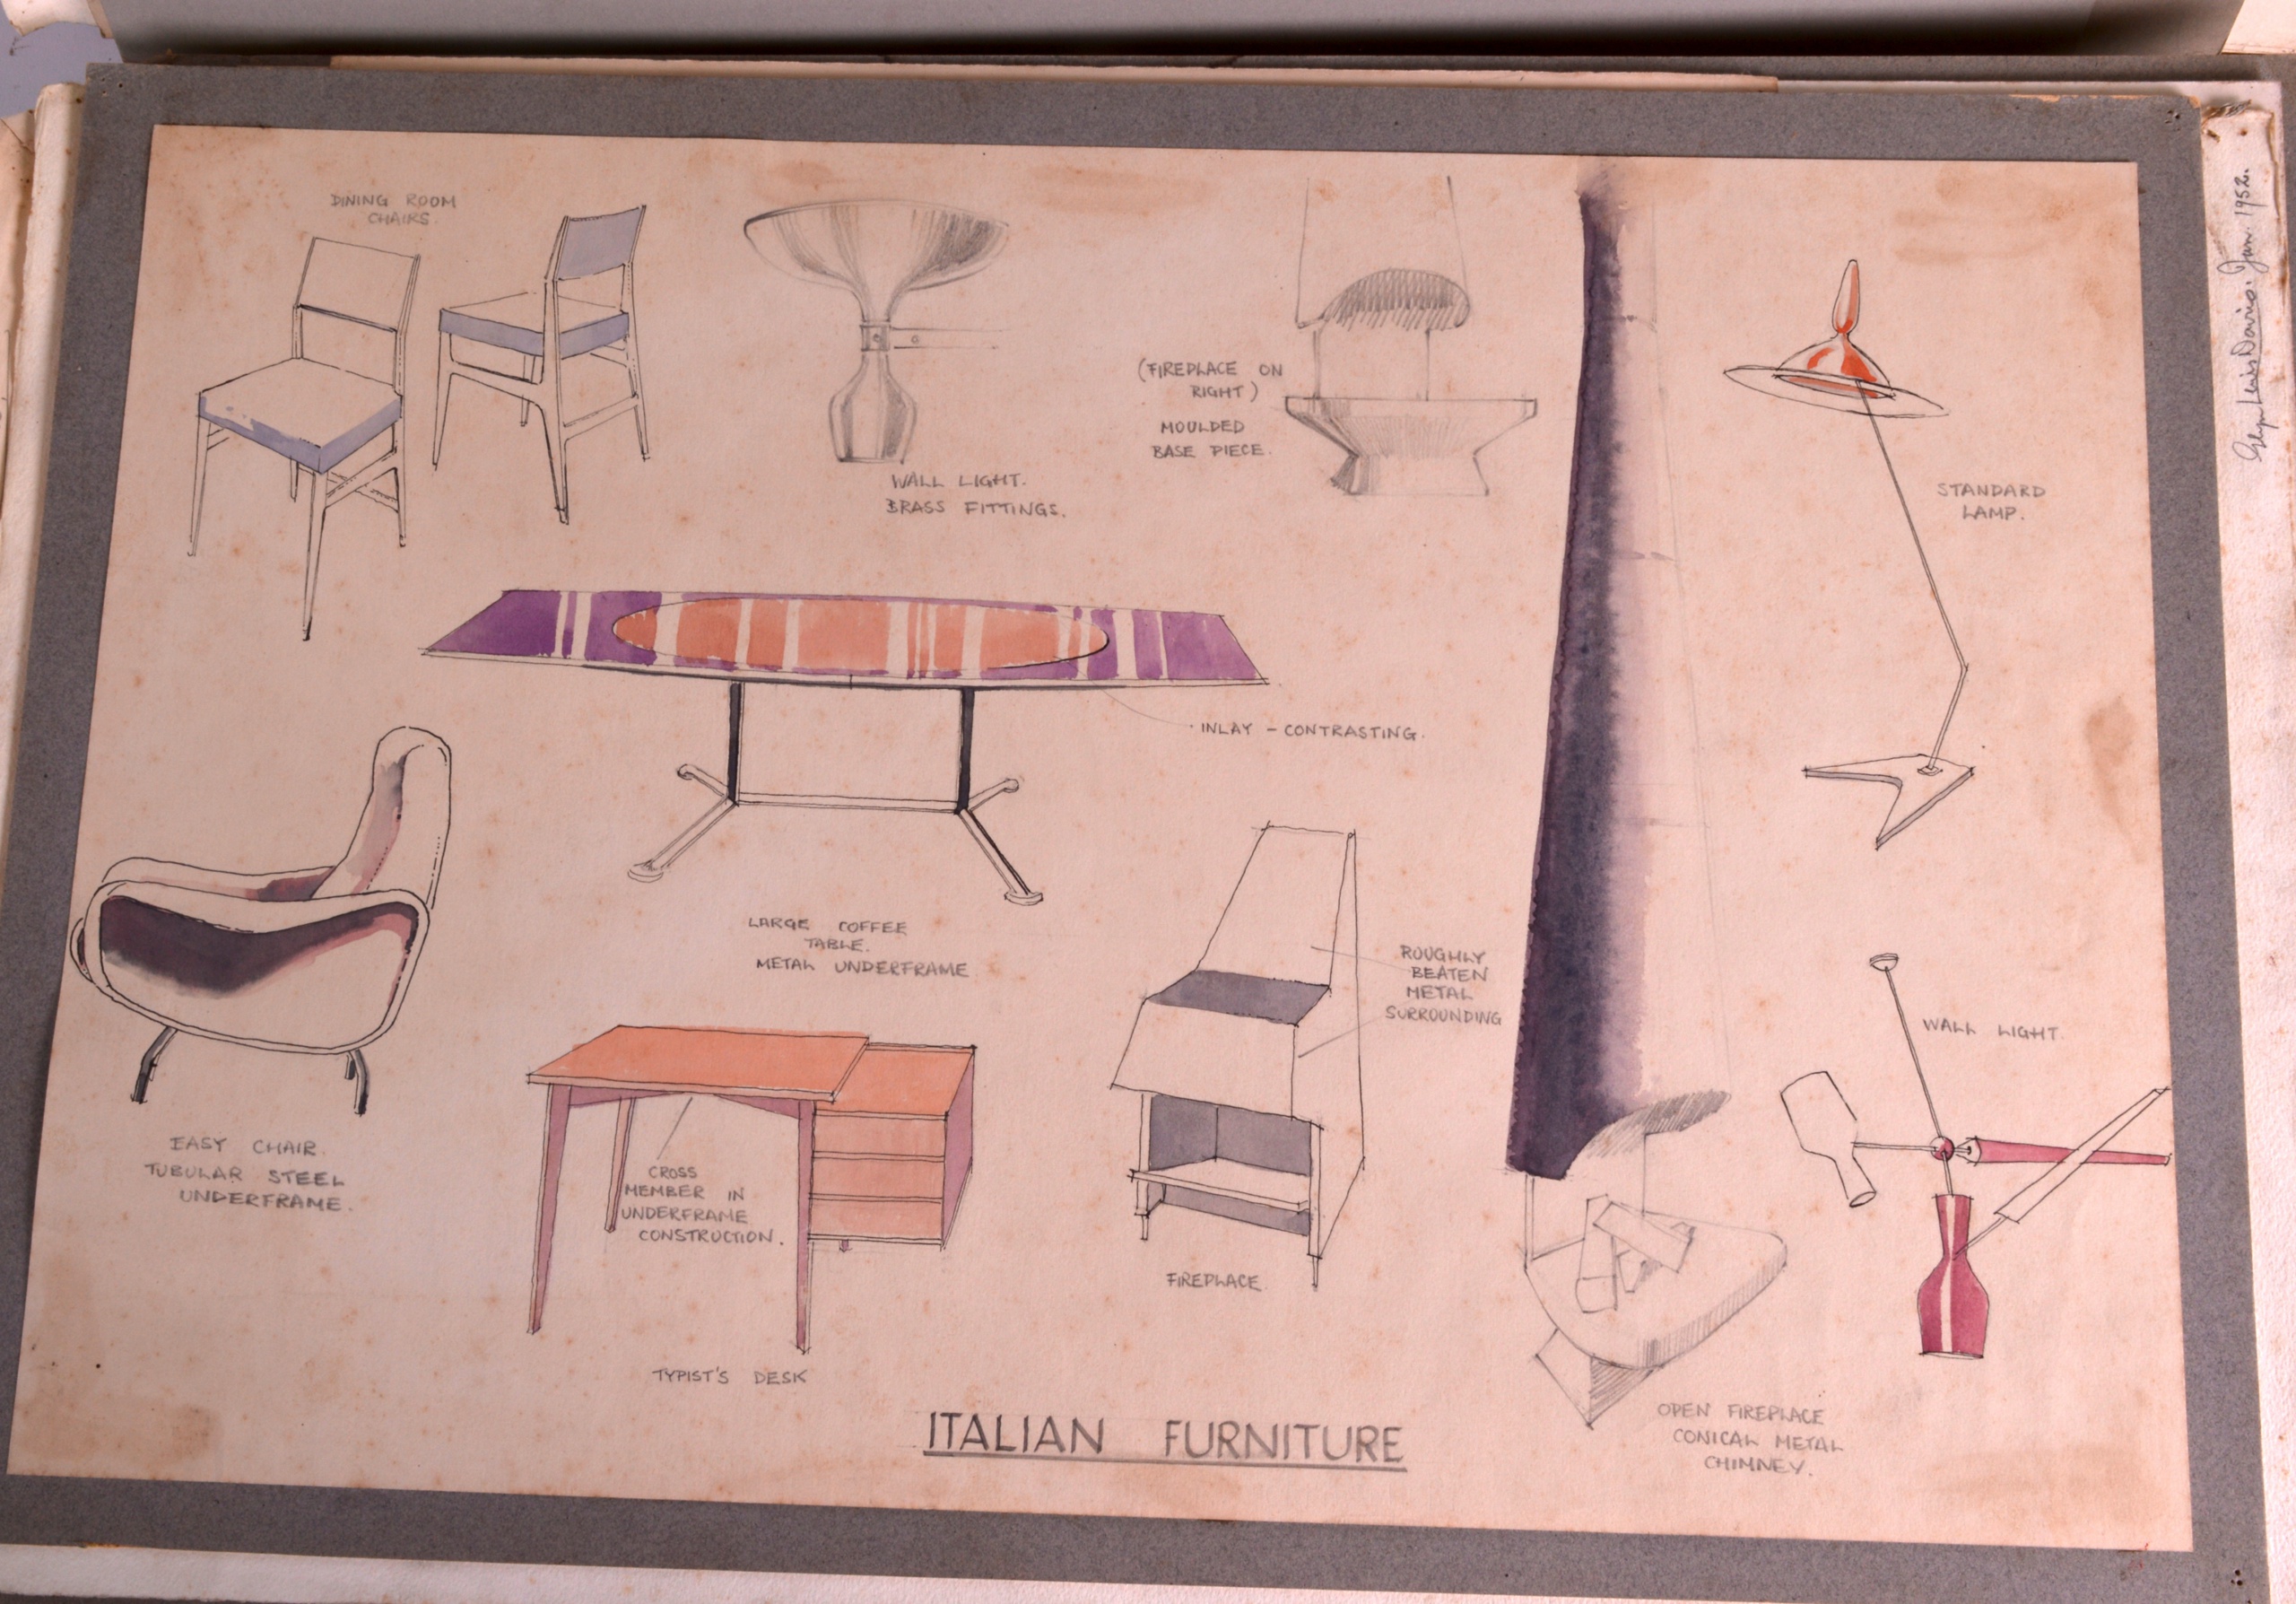 A RARE COLLECTION OF 1920S DRAWINGS including designs from the time period, contained within a - Image 3 of 3